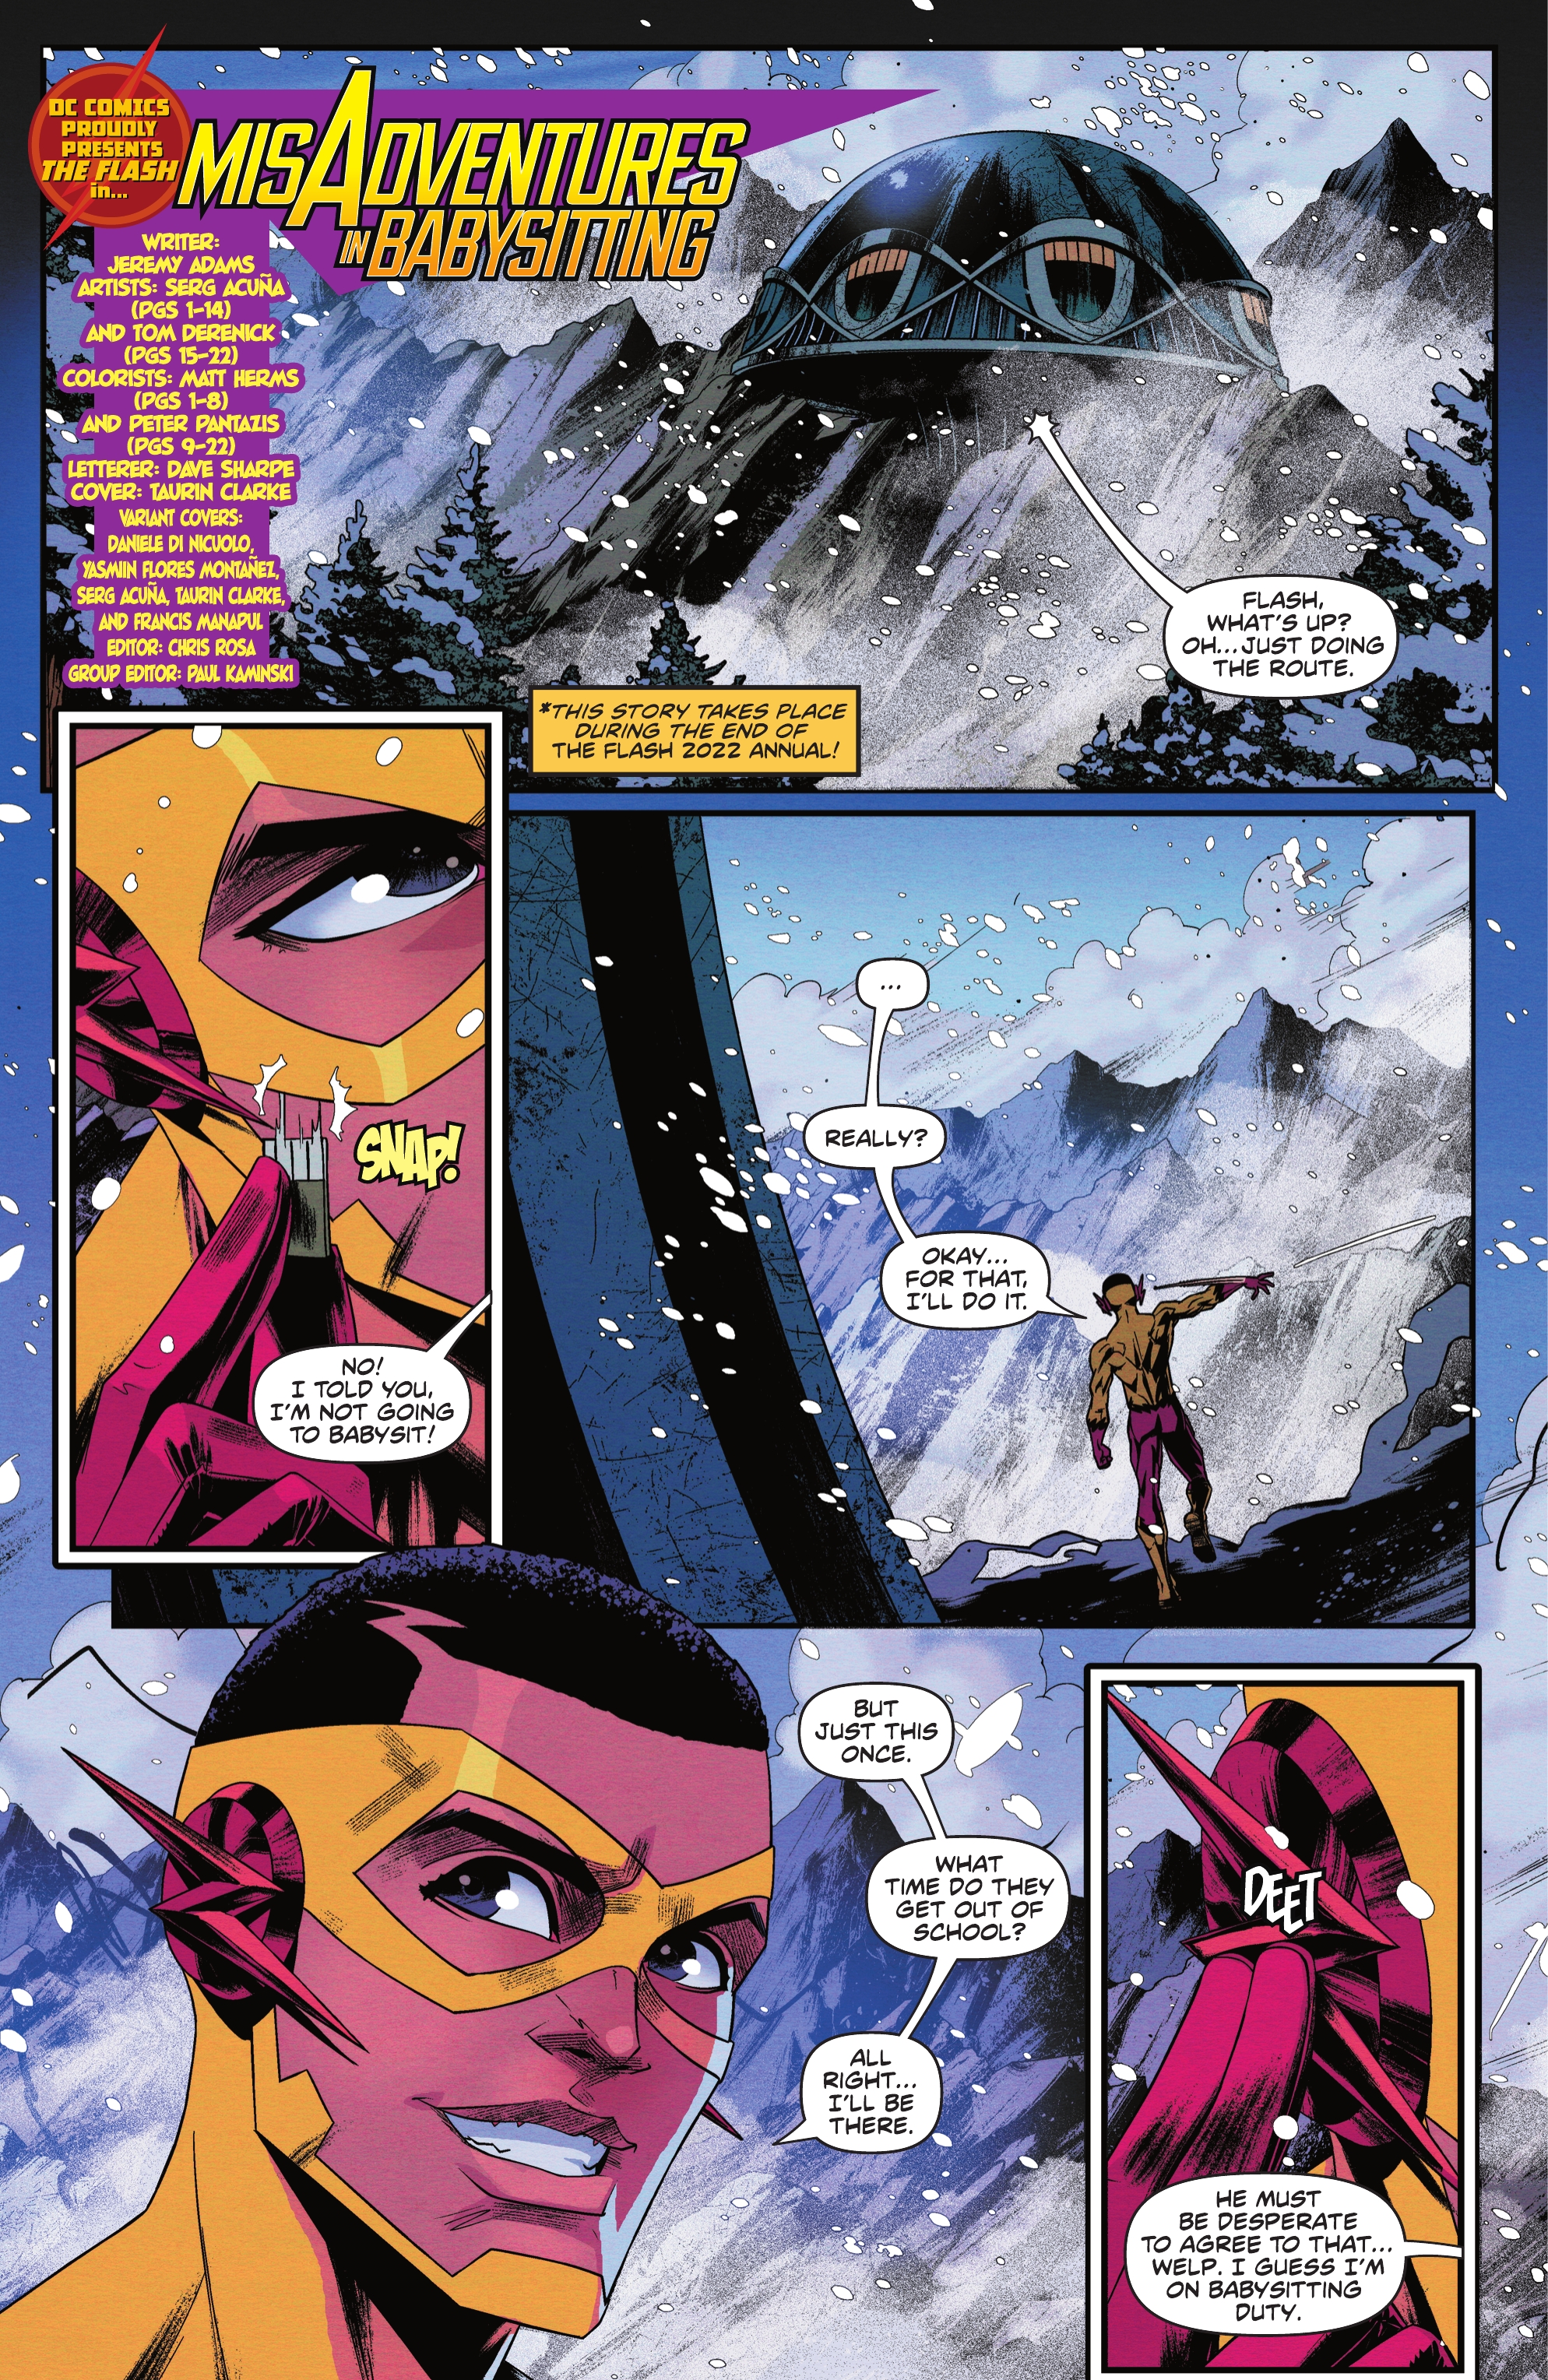 The Flash (2016-): Chapter 797 - Page 3